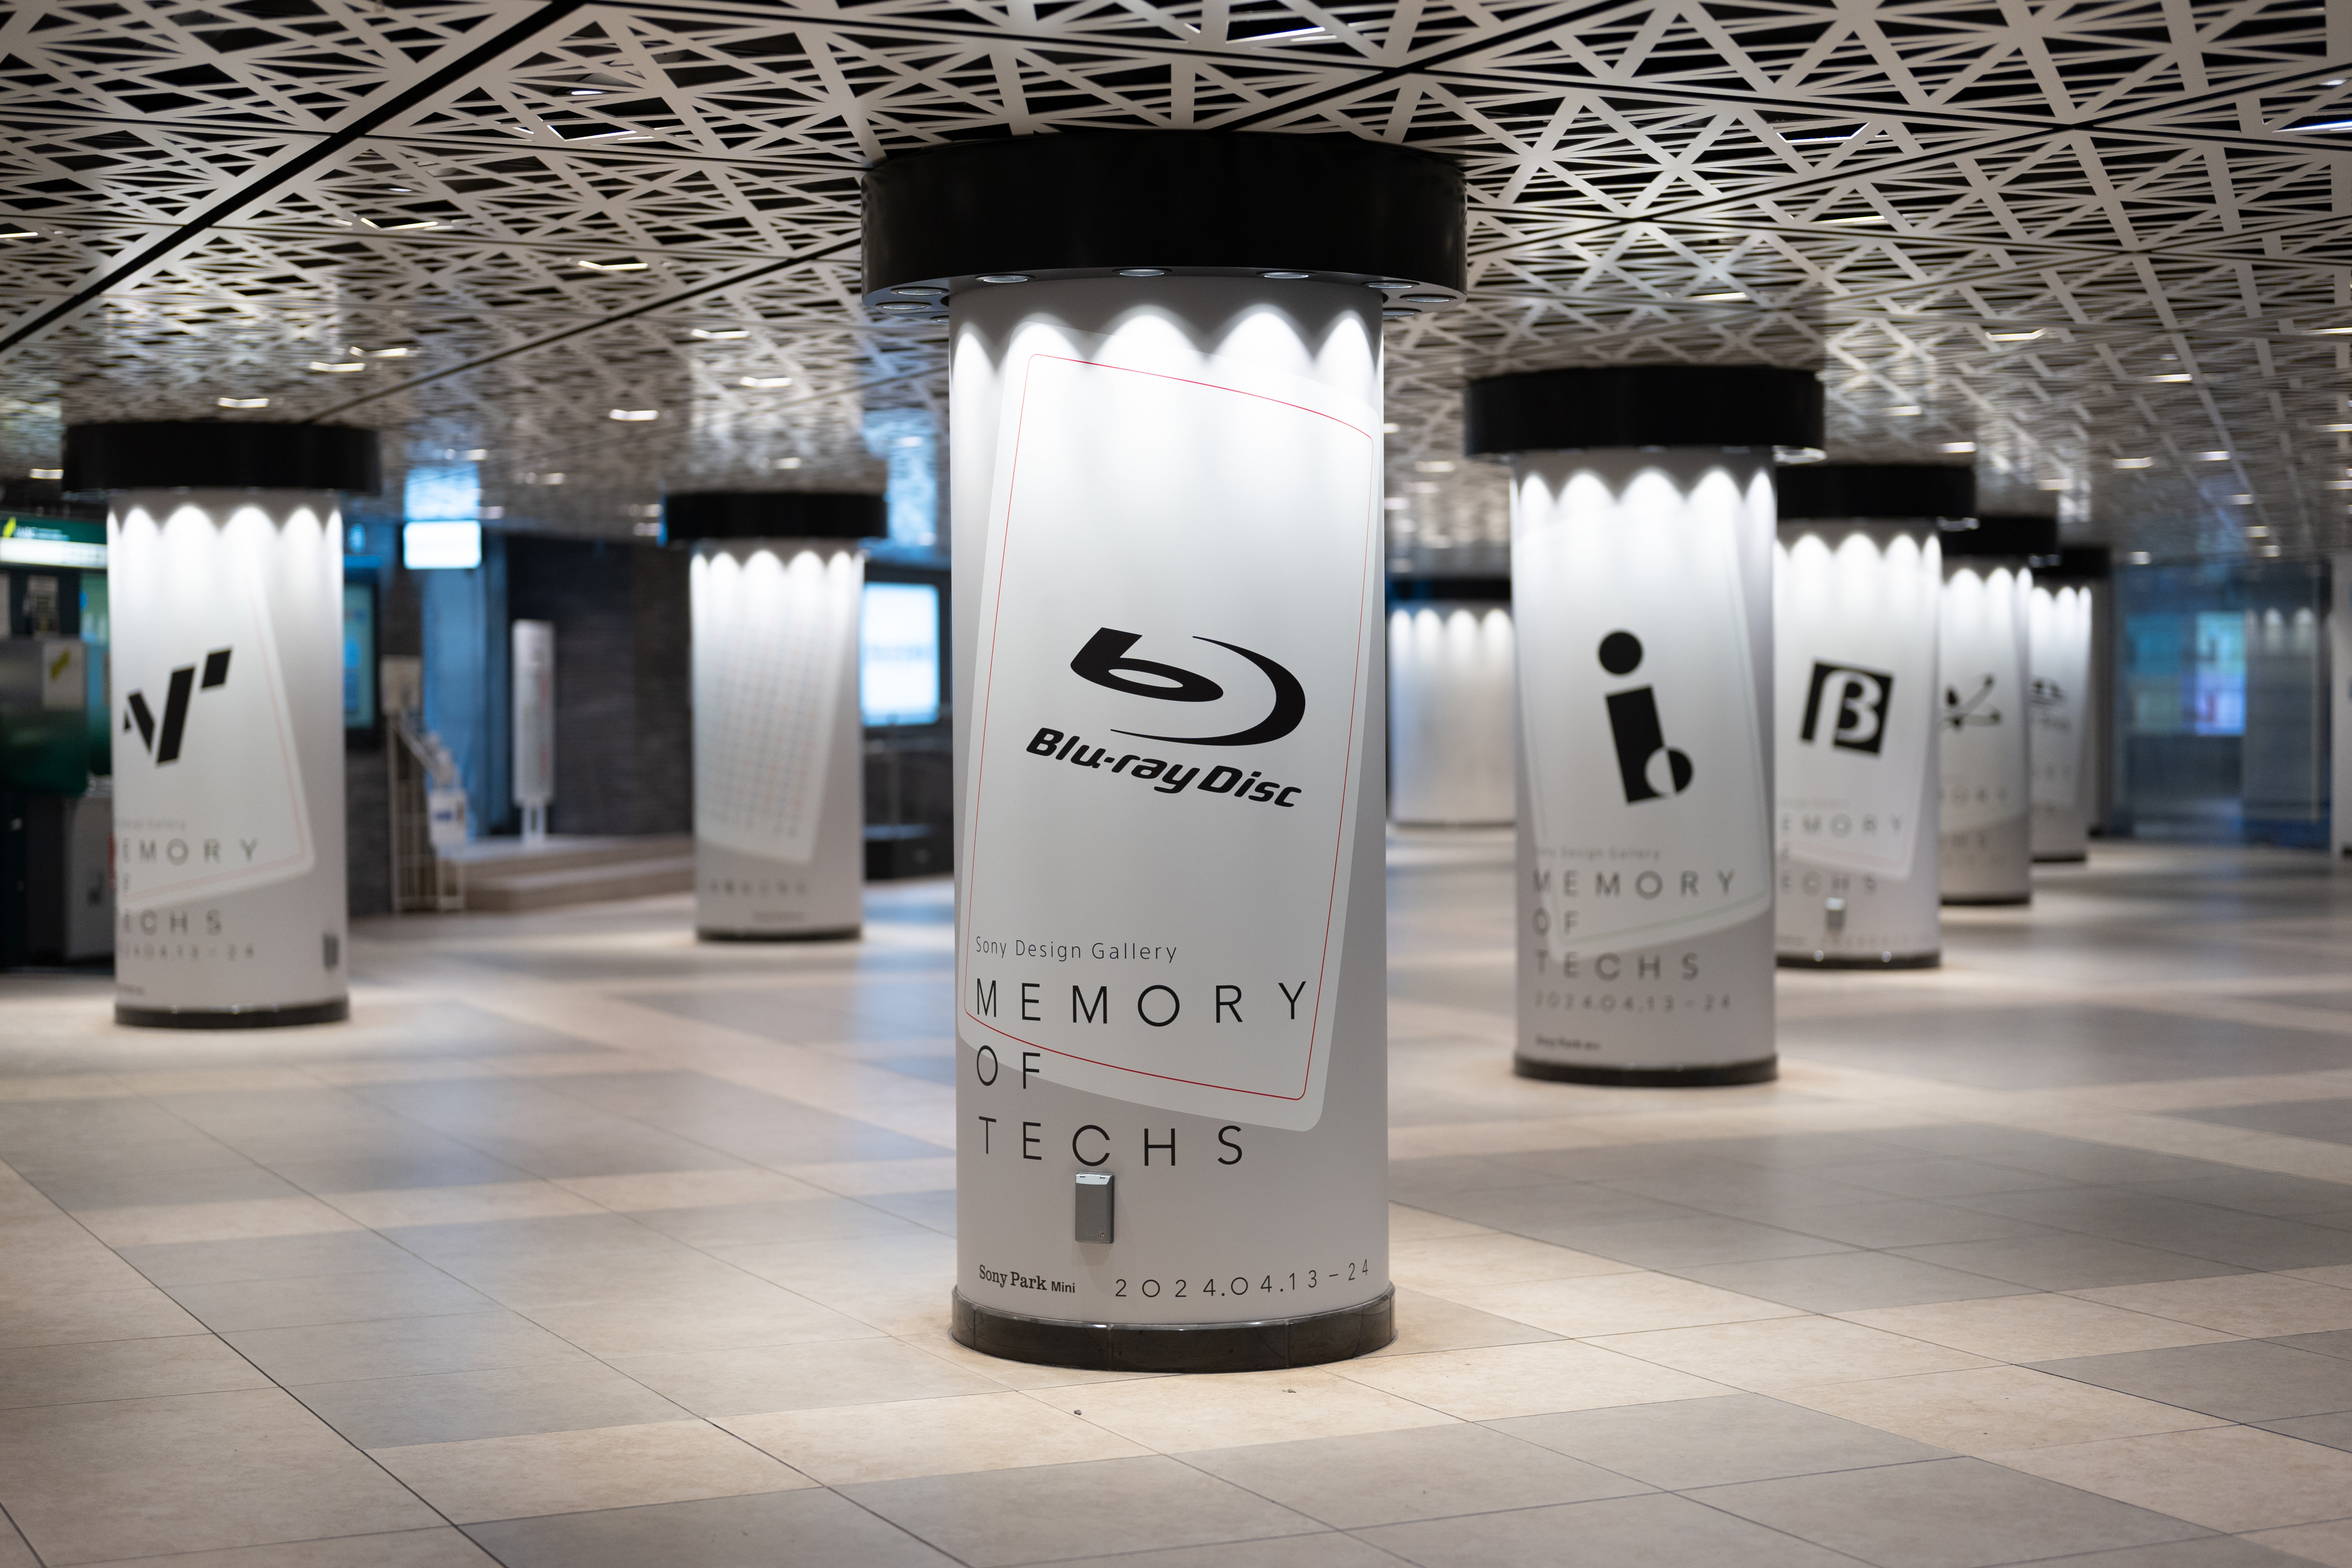 [Sony Design Gallery Vol.1 MEMORY OF TECHS] The Ginza underground concourse